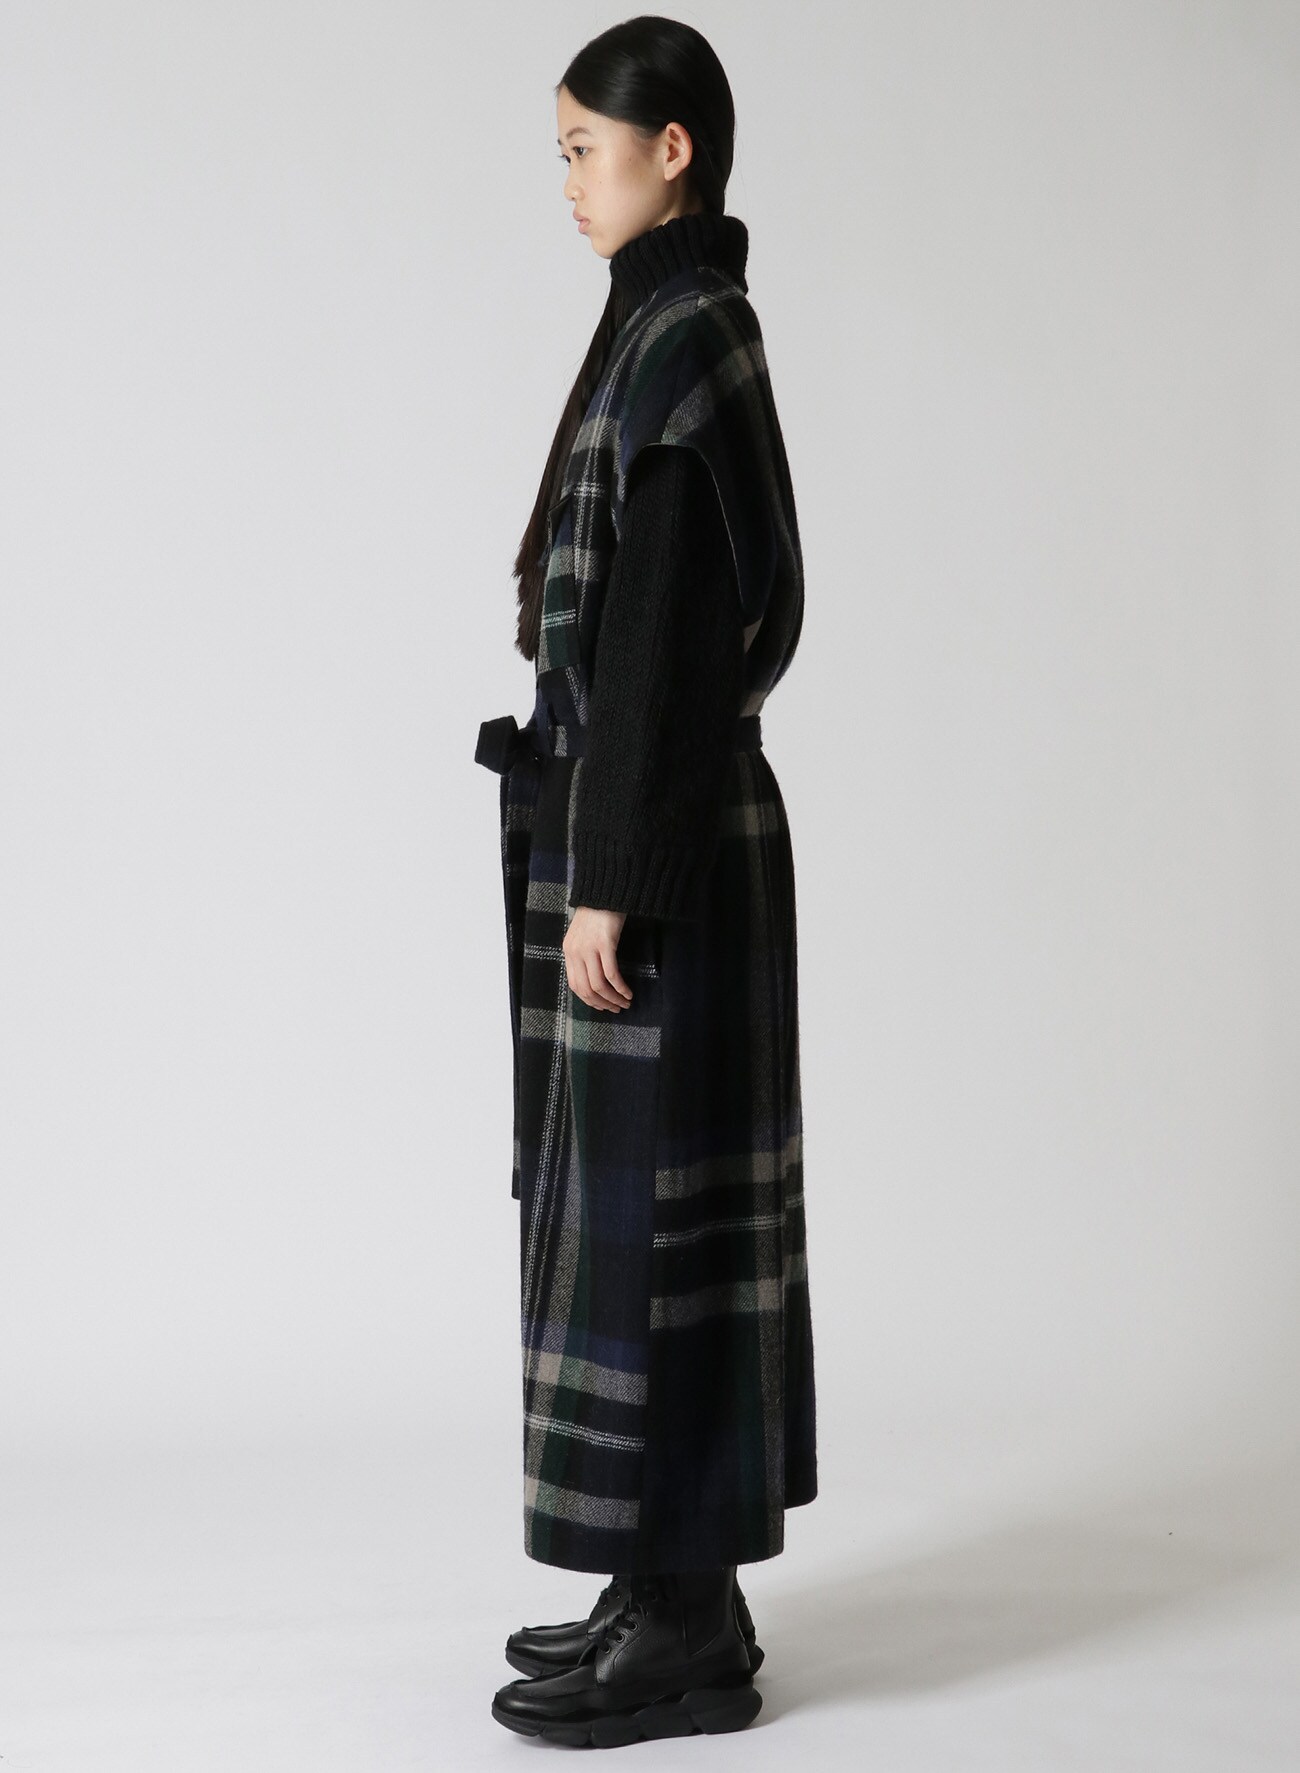 WOOL BLANKET CHECK SURGICAL DRESS